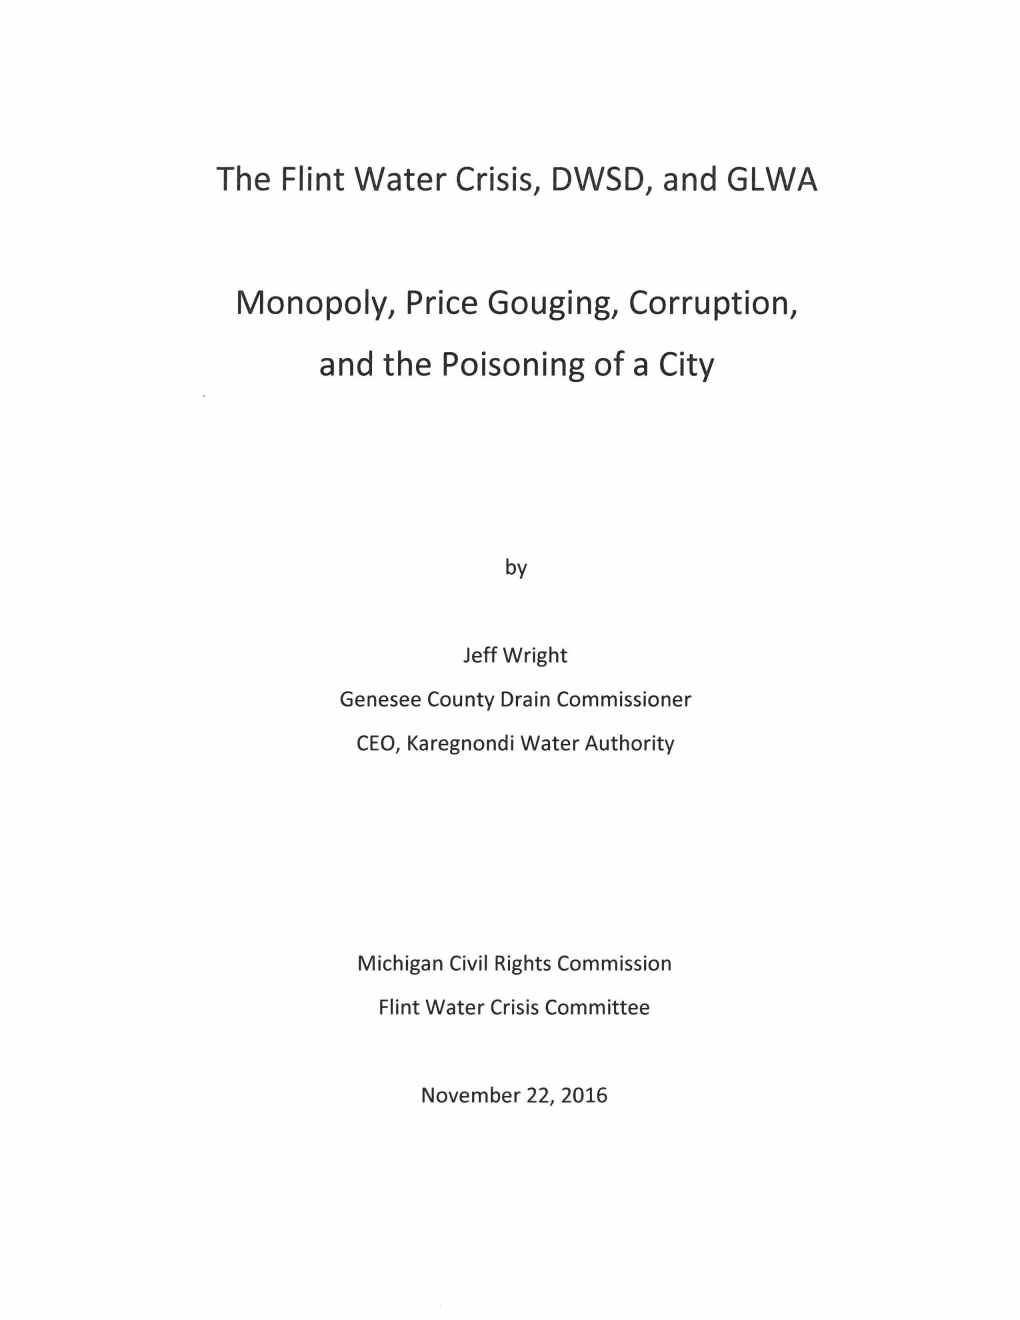 The Flint Water Crisis, DWSD, and GLWA Monopoly, Price Gouging, Corruption, and the Poisoning of a City